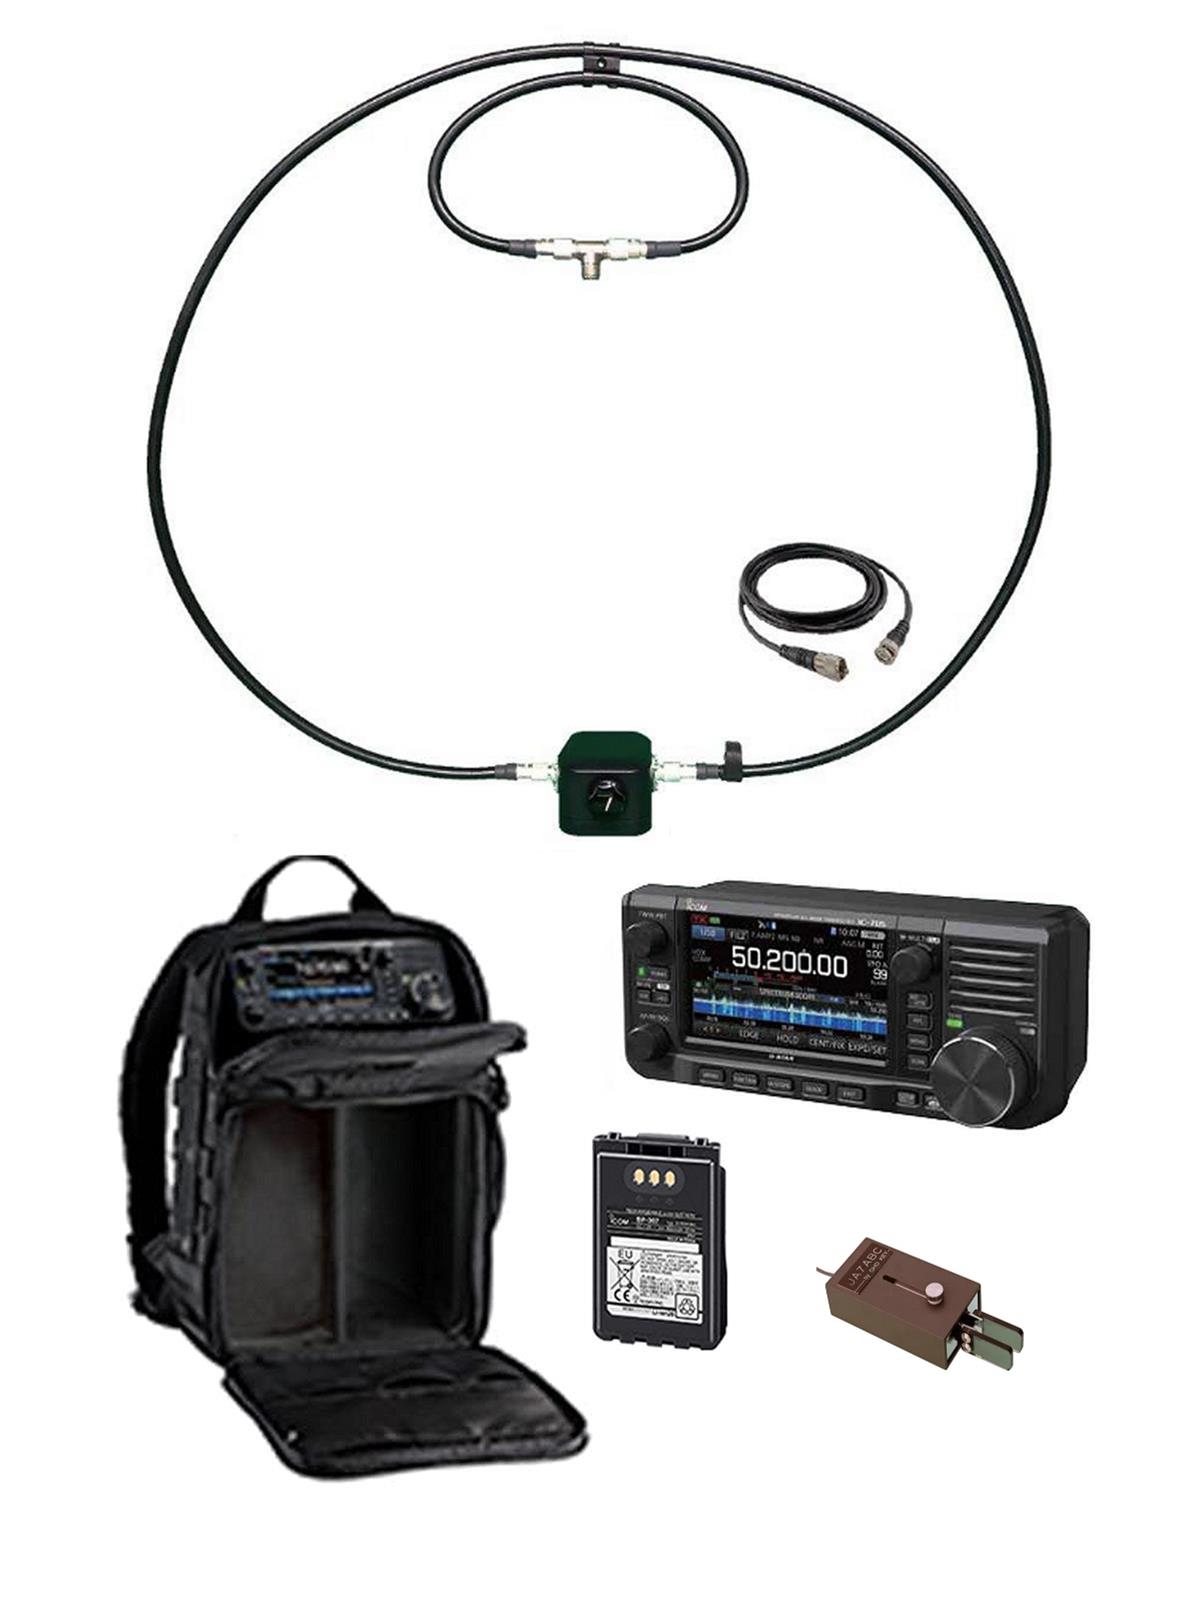 DX Engineering DXE-705ADVENTURE DX Engineering Select Transceiver Packages  | DX Engineering